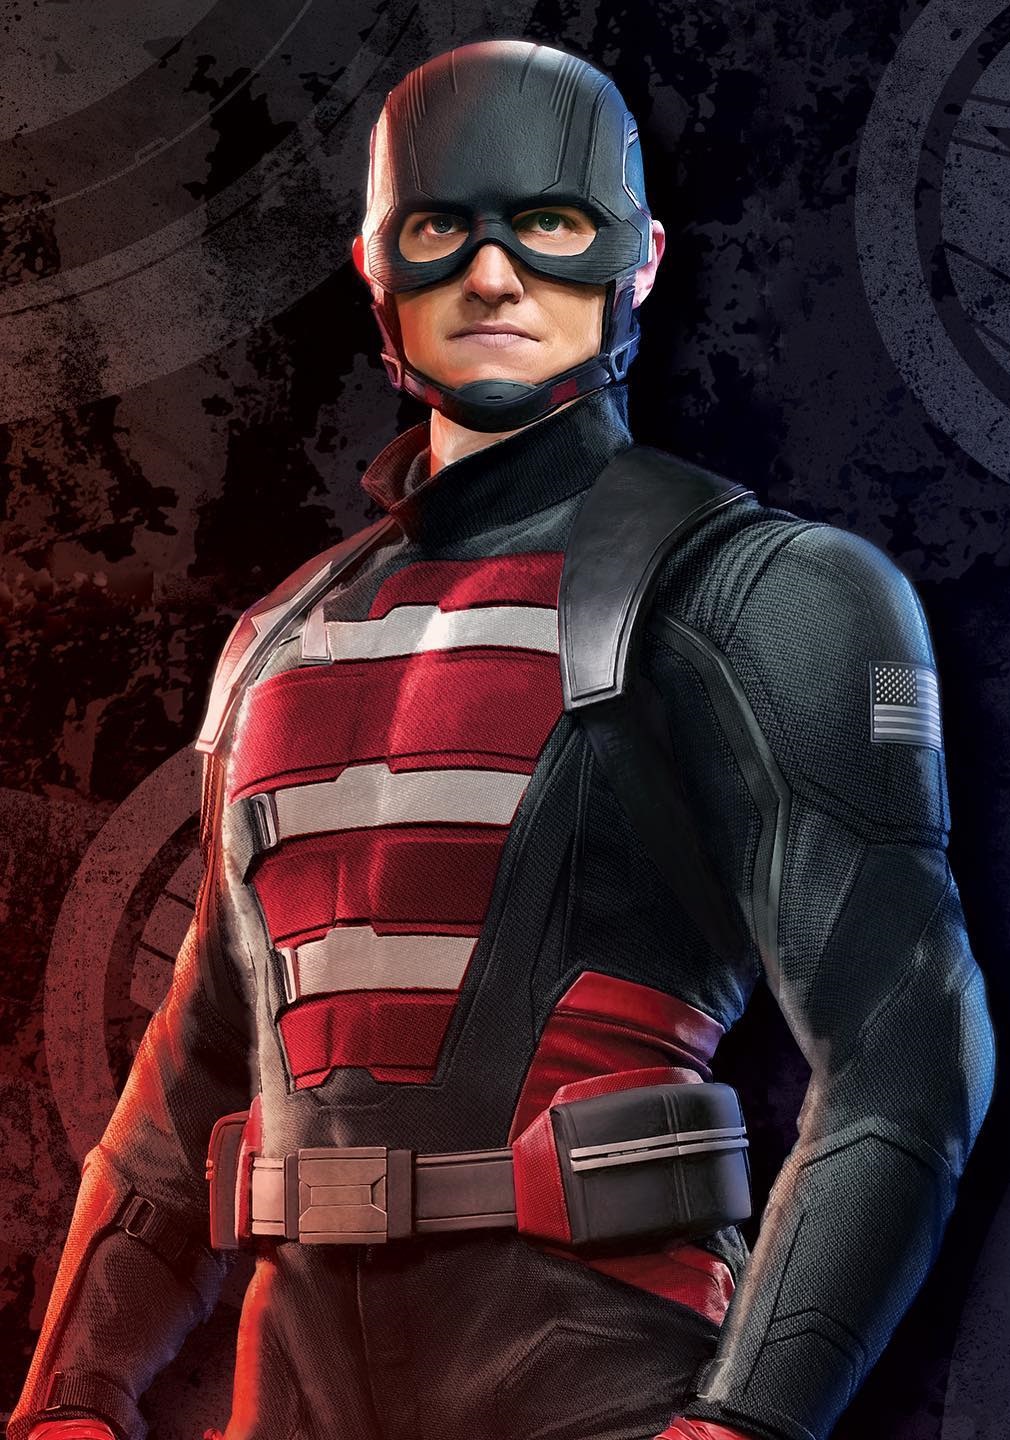 Captain America: Student by Day, Soccer Star by Night – The